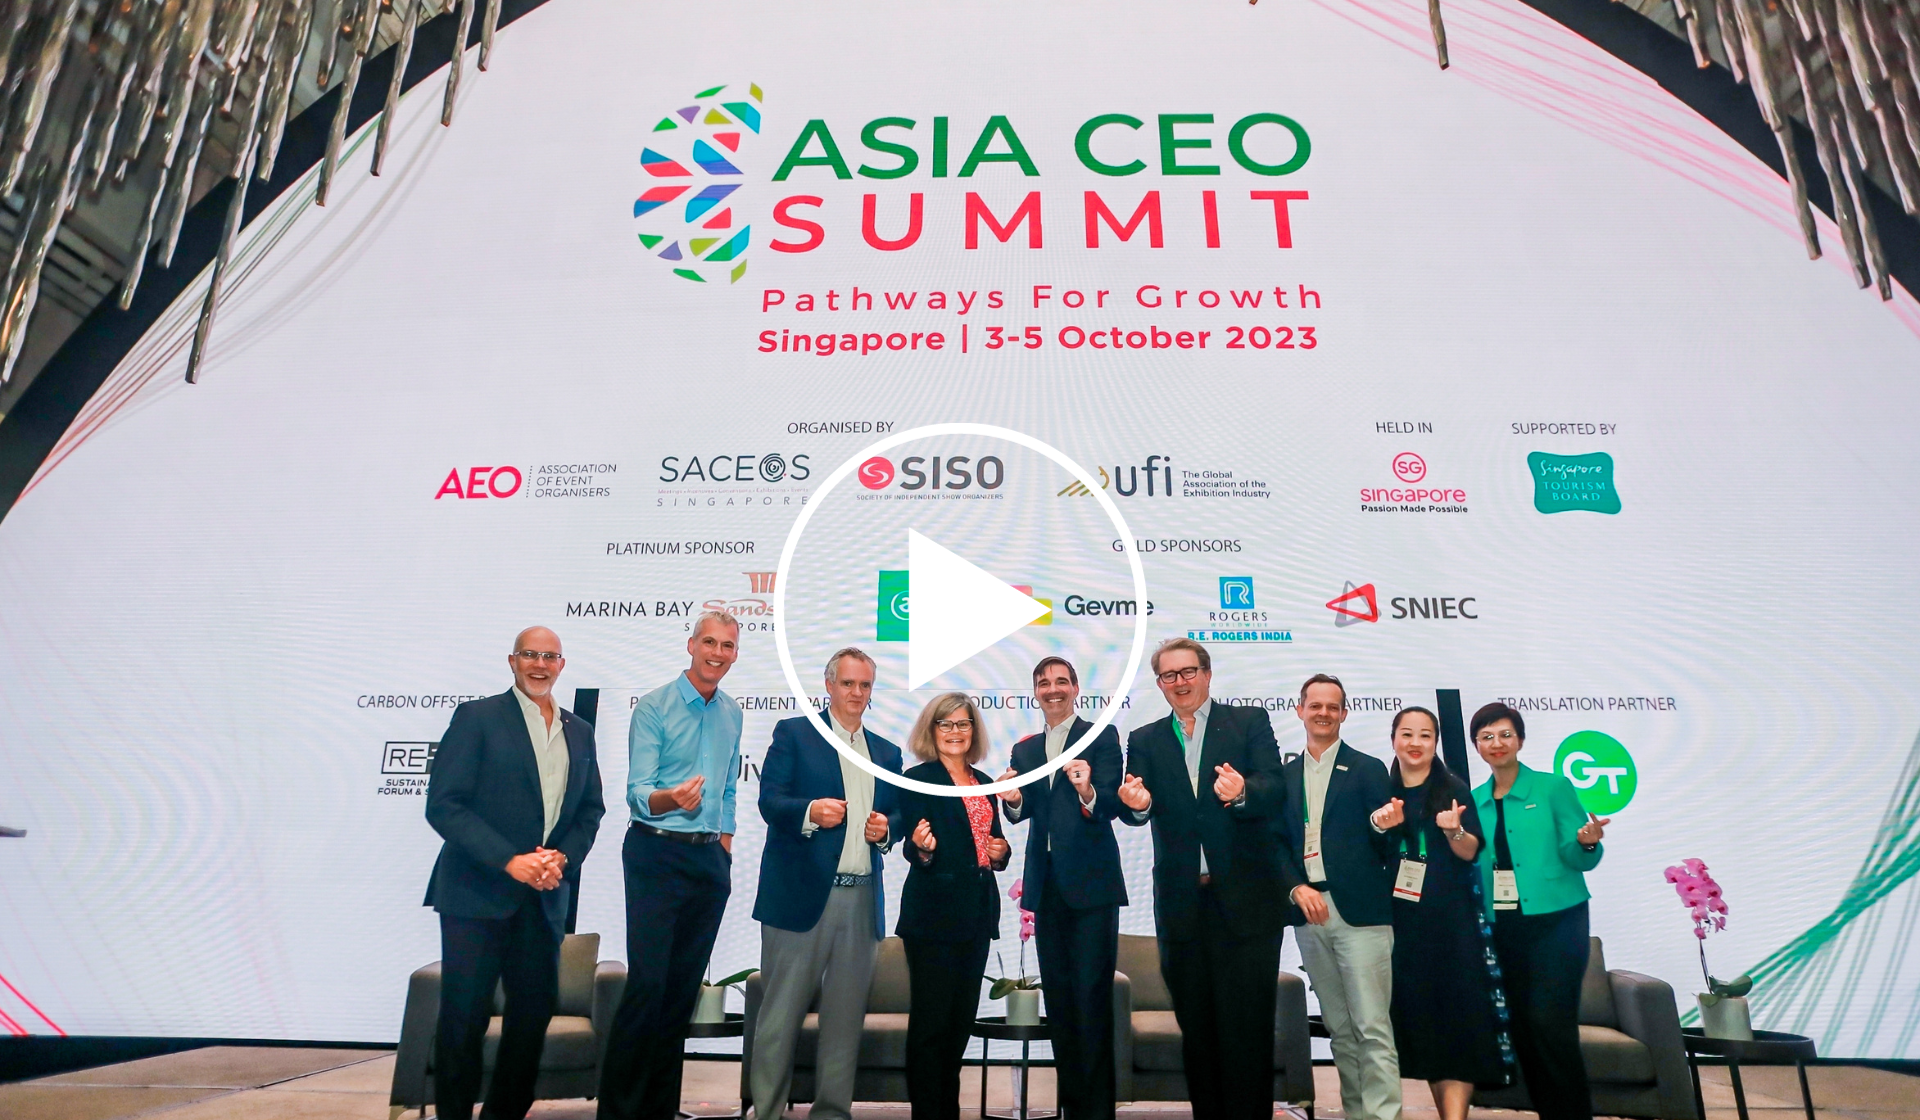 Watch: Asia CEO Summit 2023 Highlights